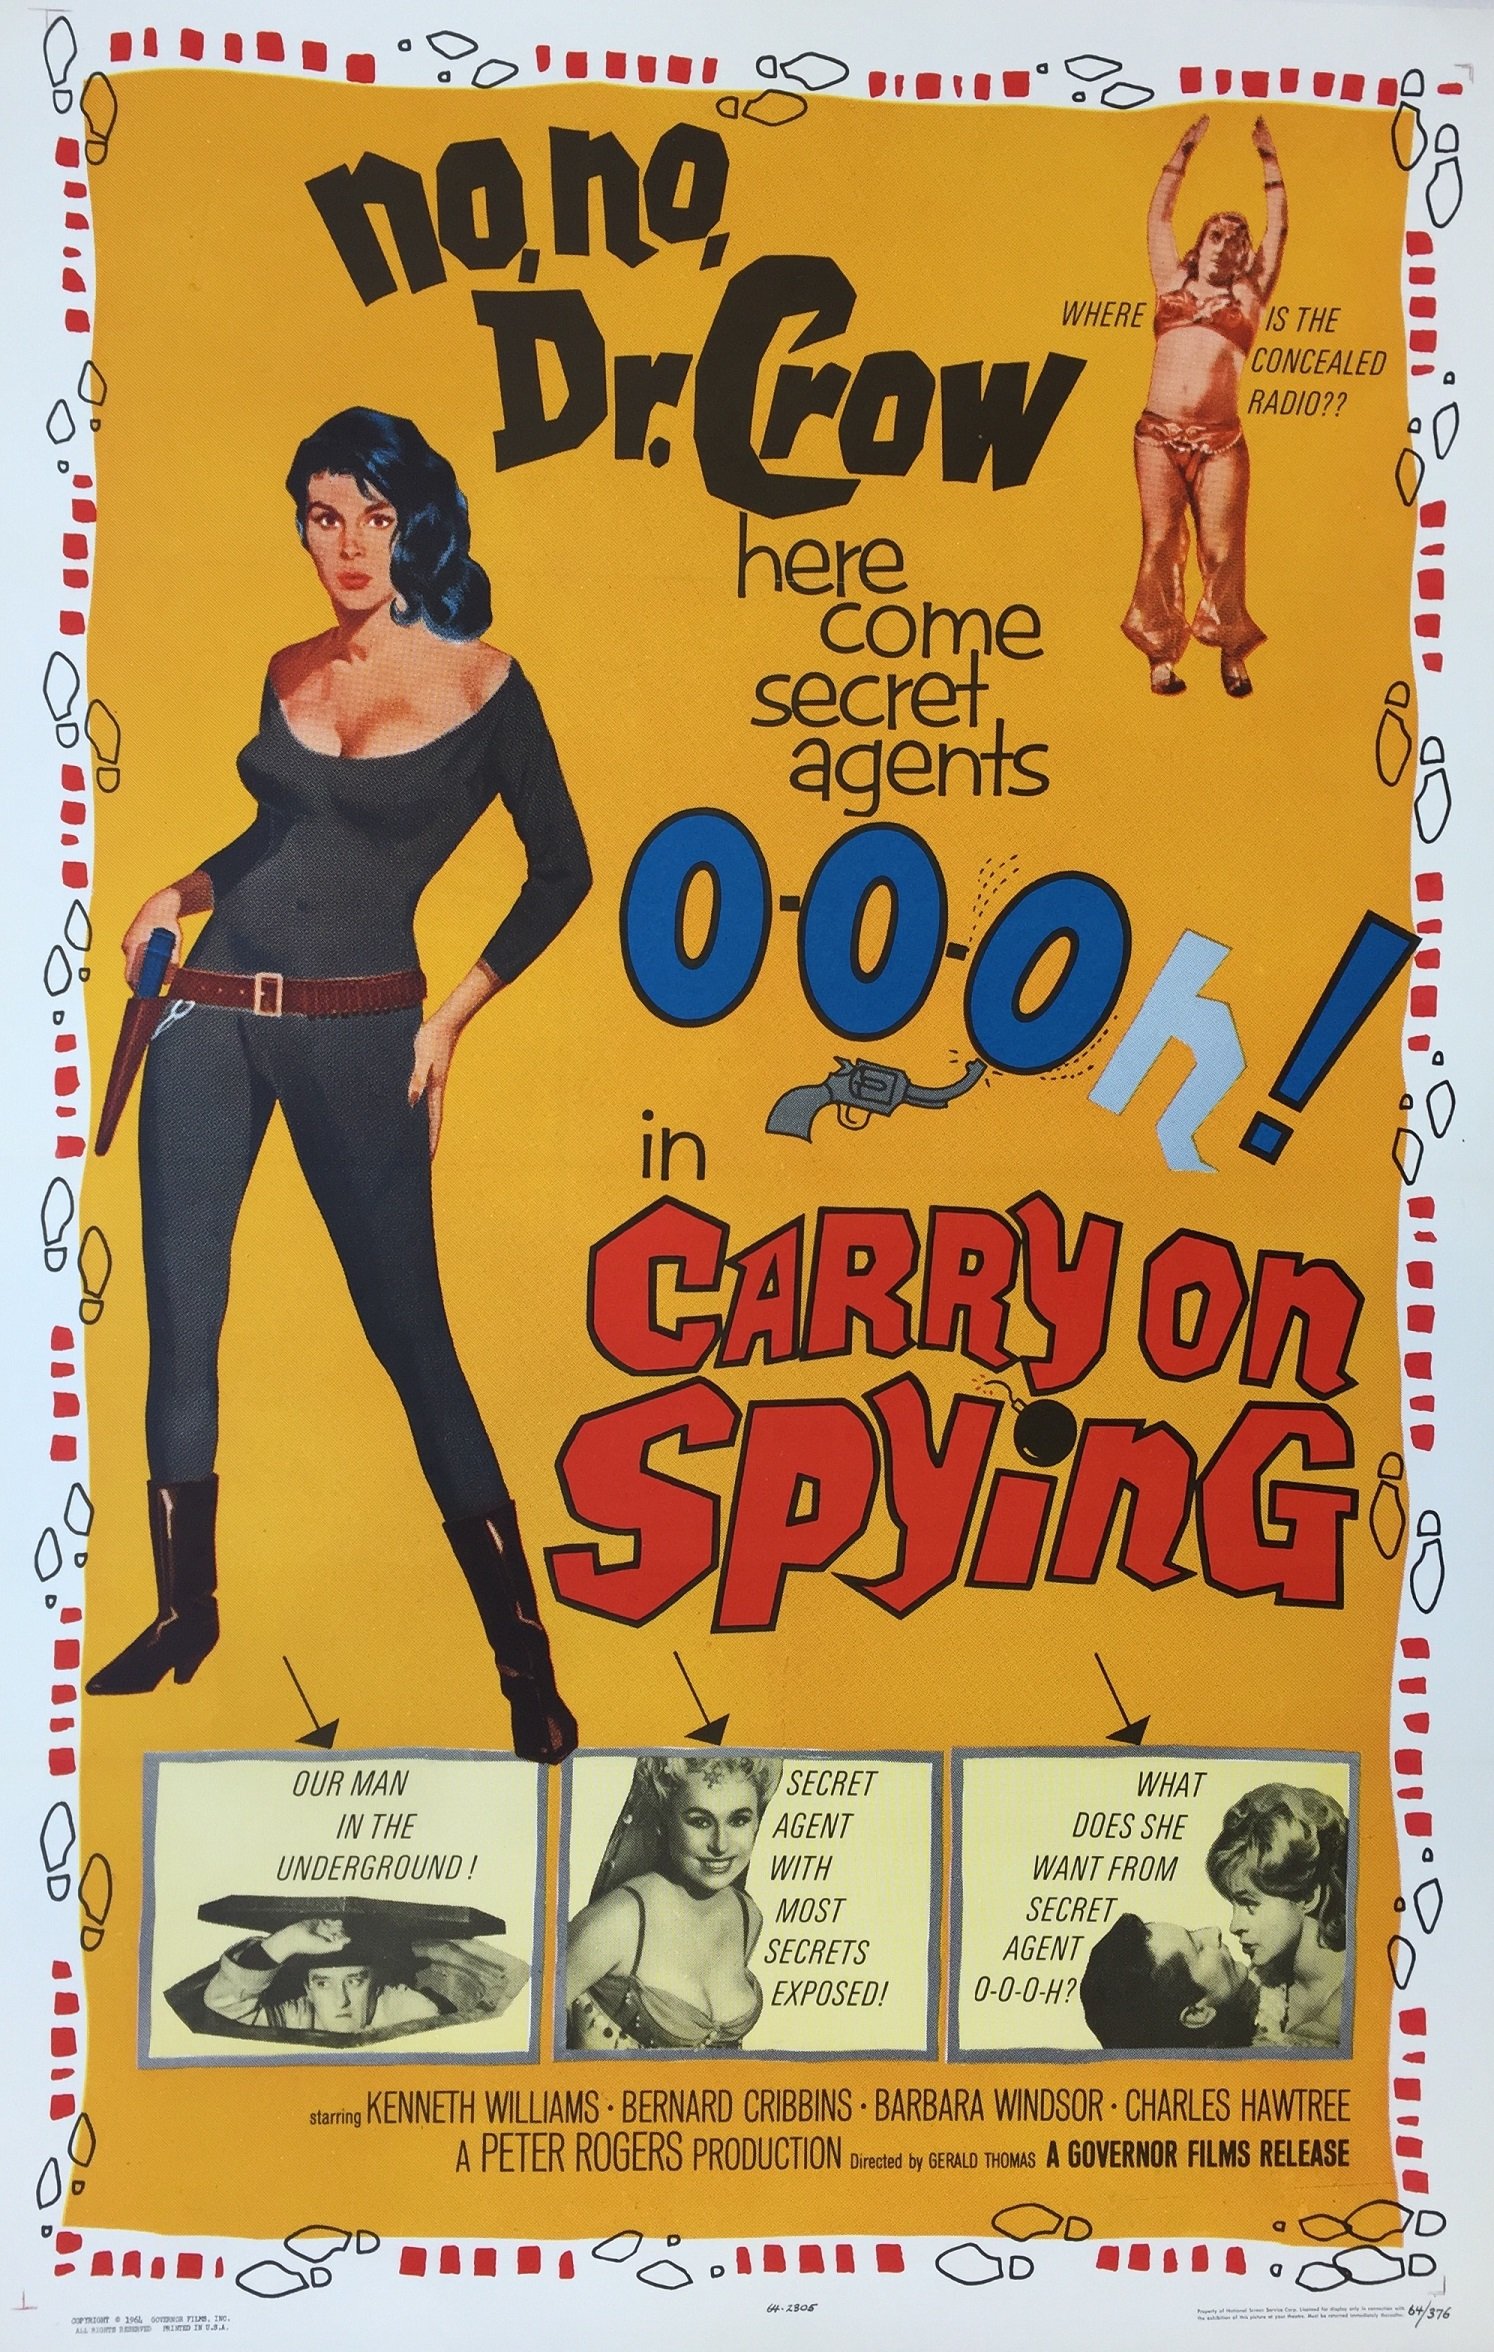 Original vintage cinema movie poster for the comedy, Carry On Spying